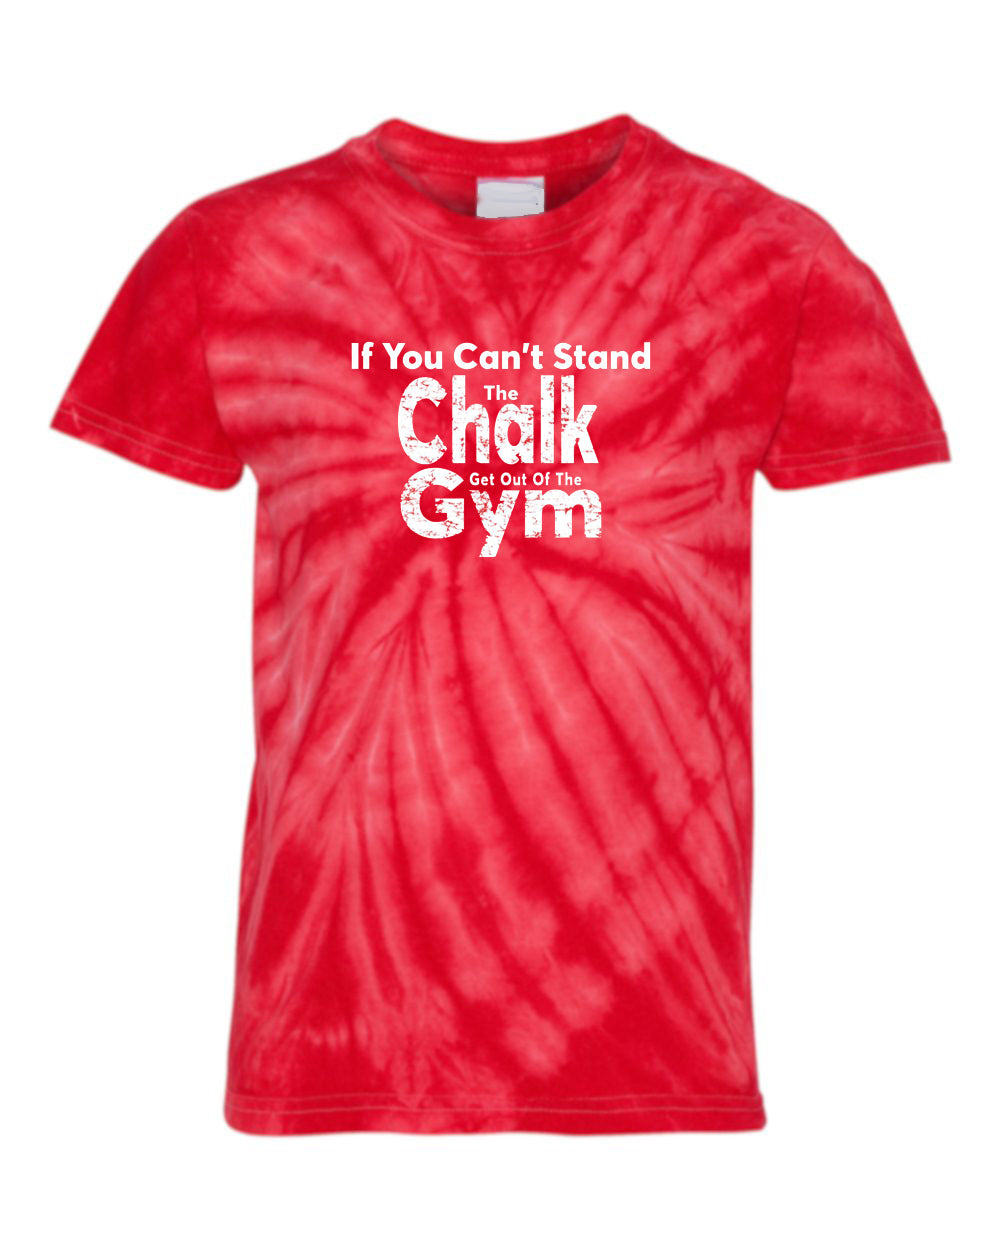 If You Can't Stand The Chalk Get Out Of The Gym Youth Tie Dye T-Shirt Red